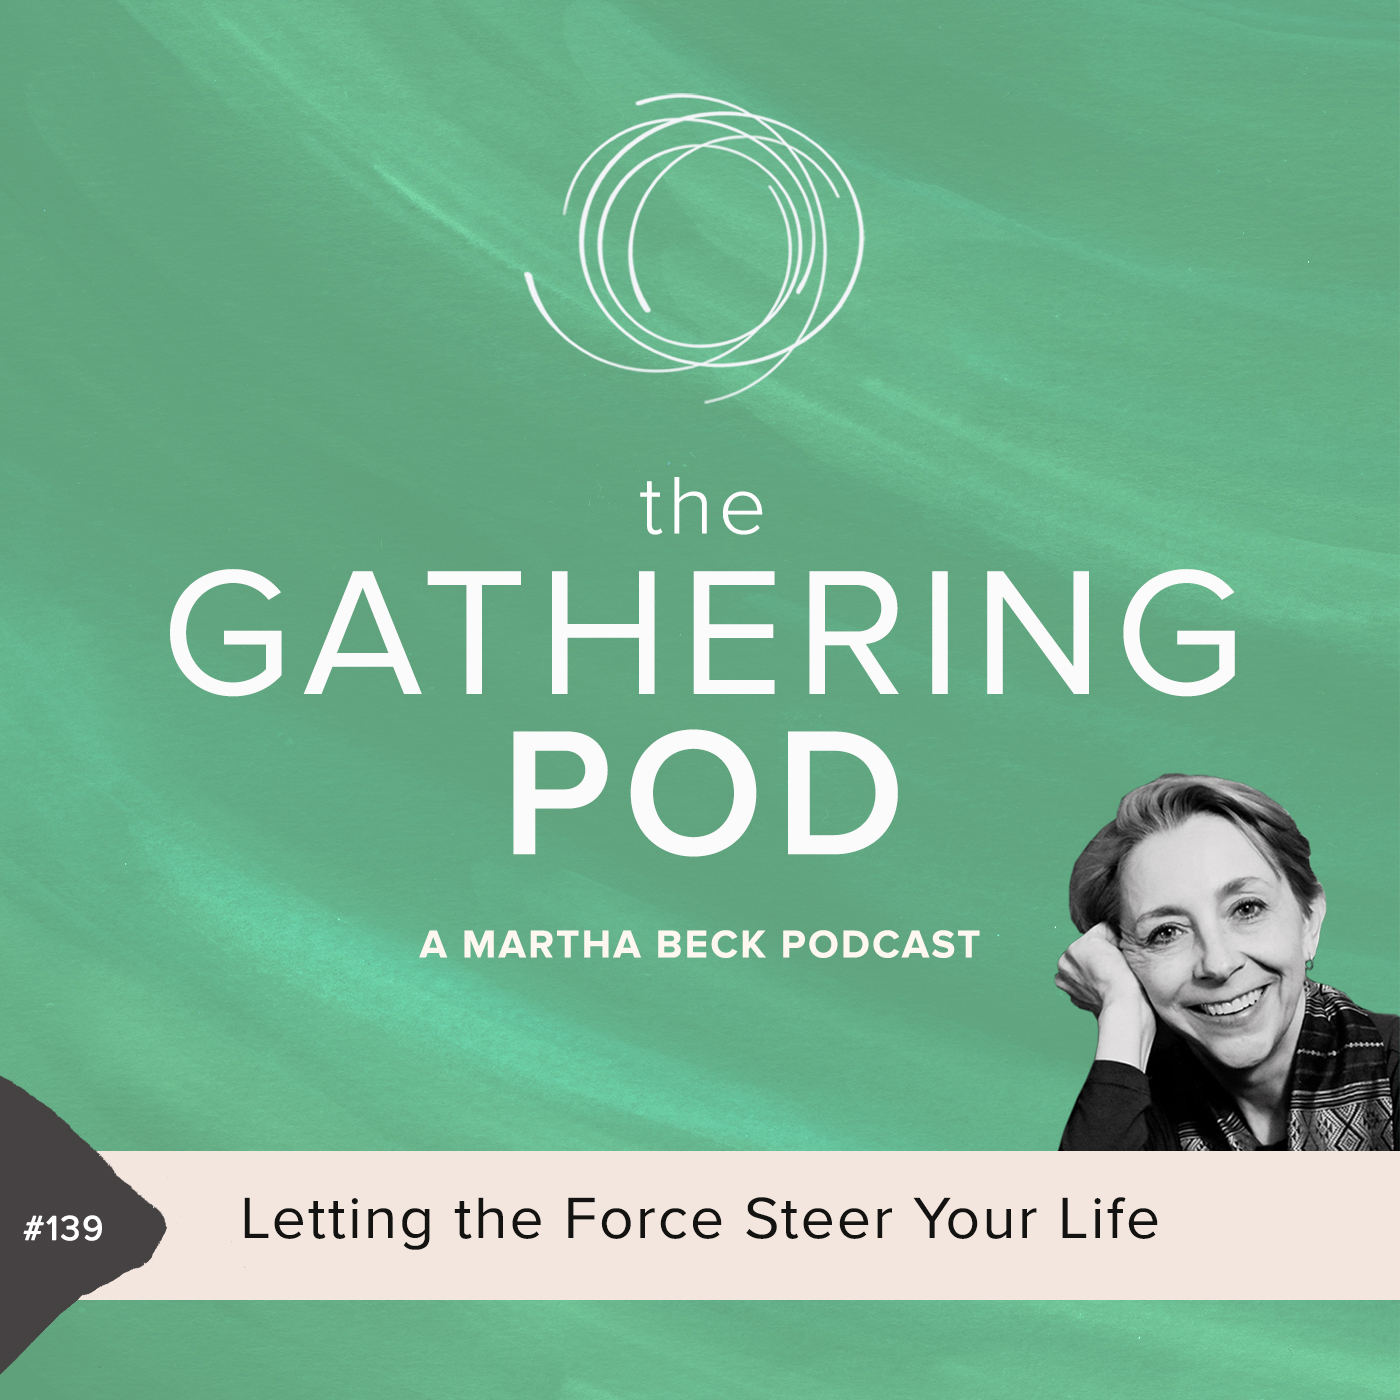 Image for The Gathering Pod A Martha Beck Podcast Episode #139 Letting the Force Steer Your Life